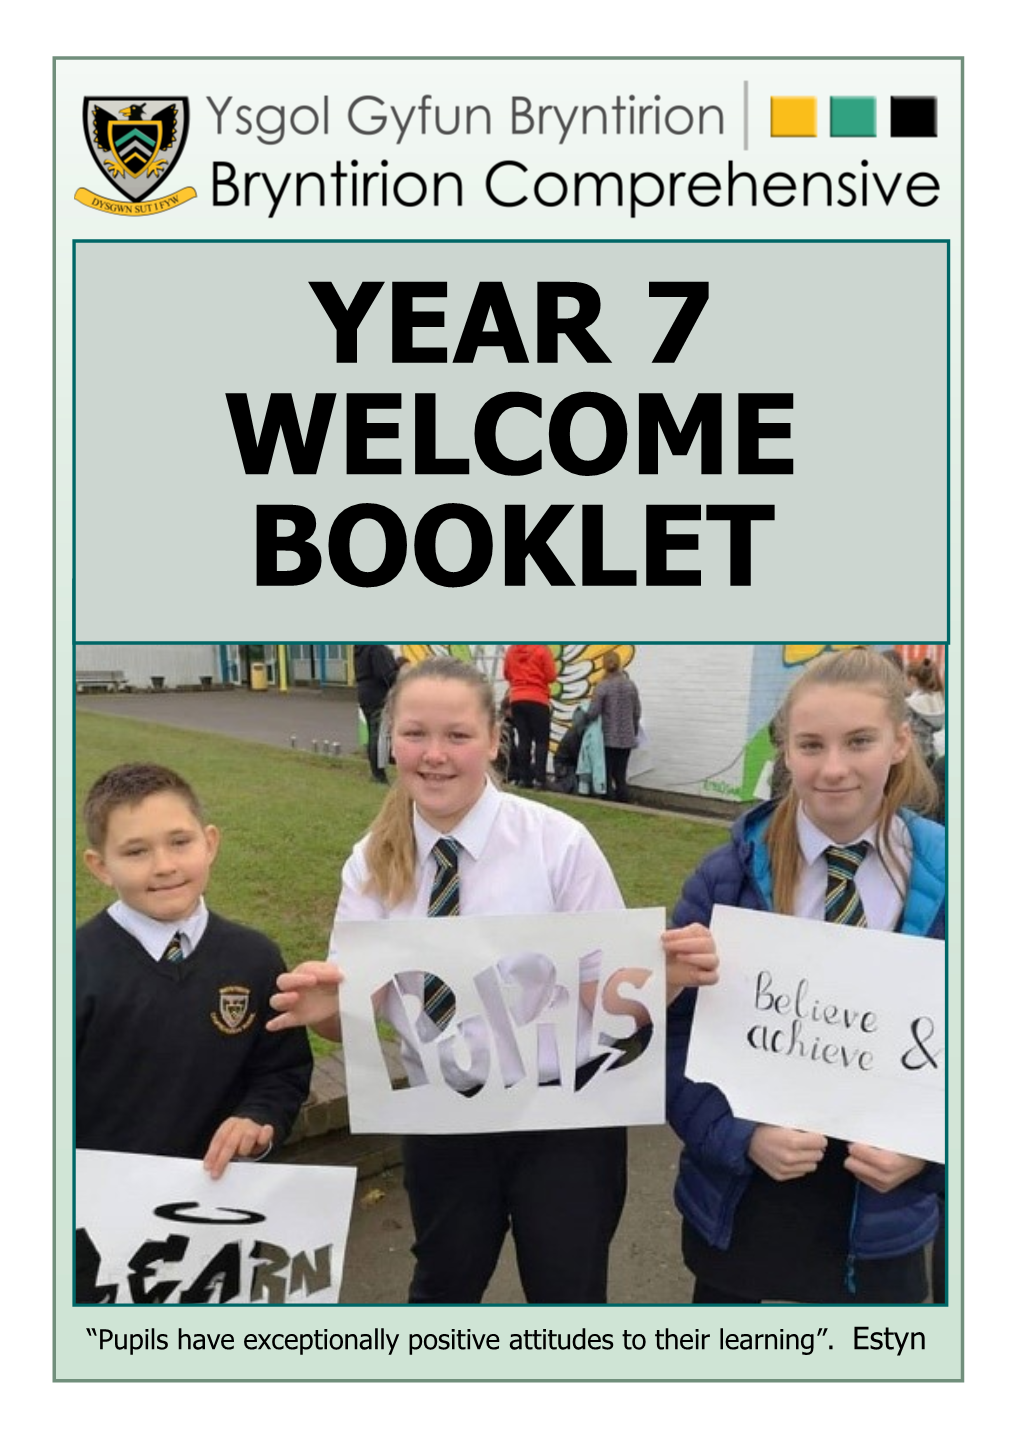 Year 7 Welcome Booklet